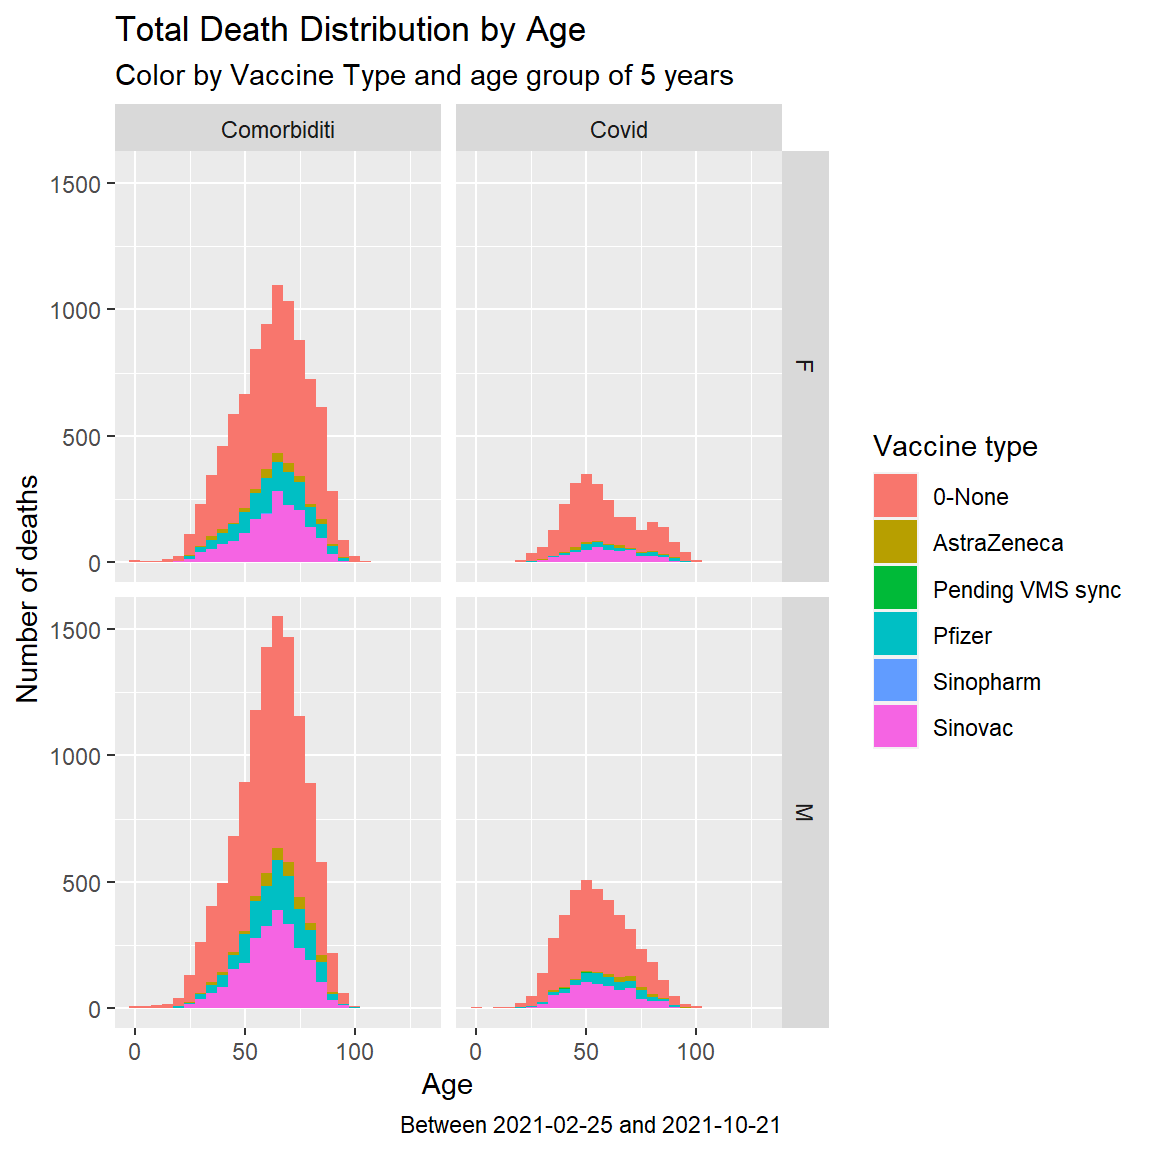 Summary distribution of Covid deaths by age group and vaccine type with dual facet